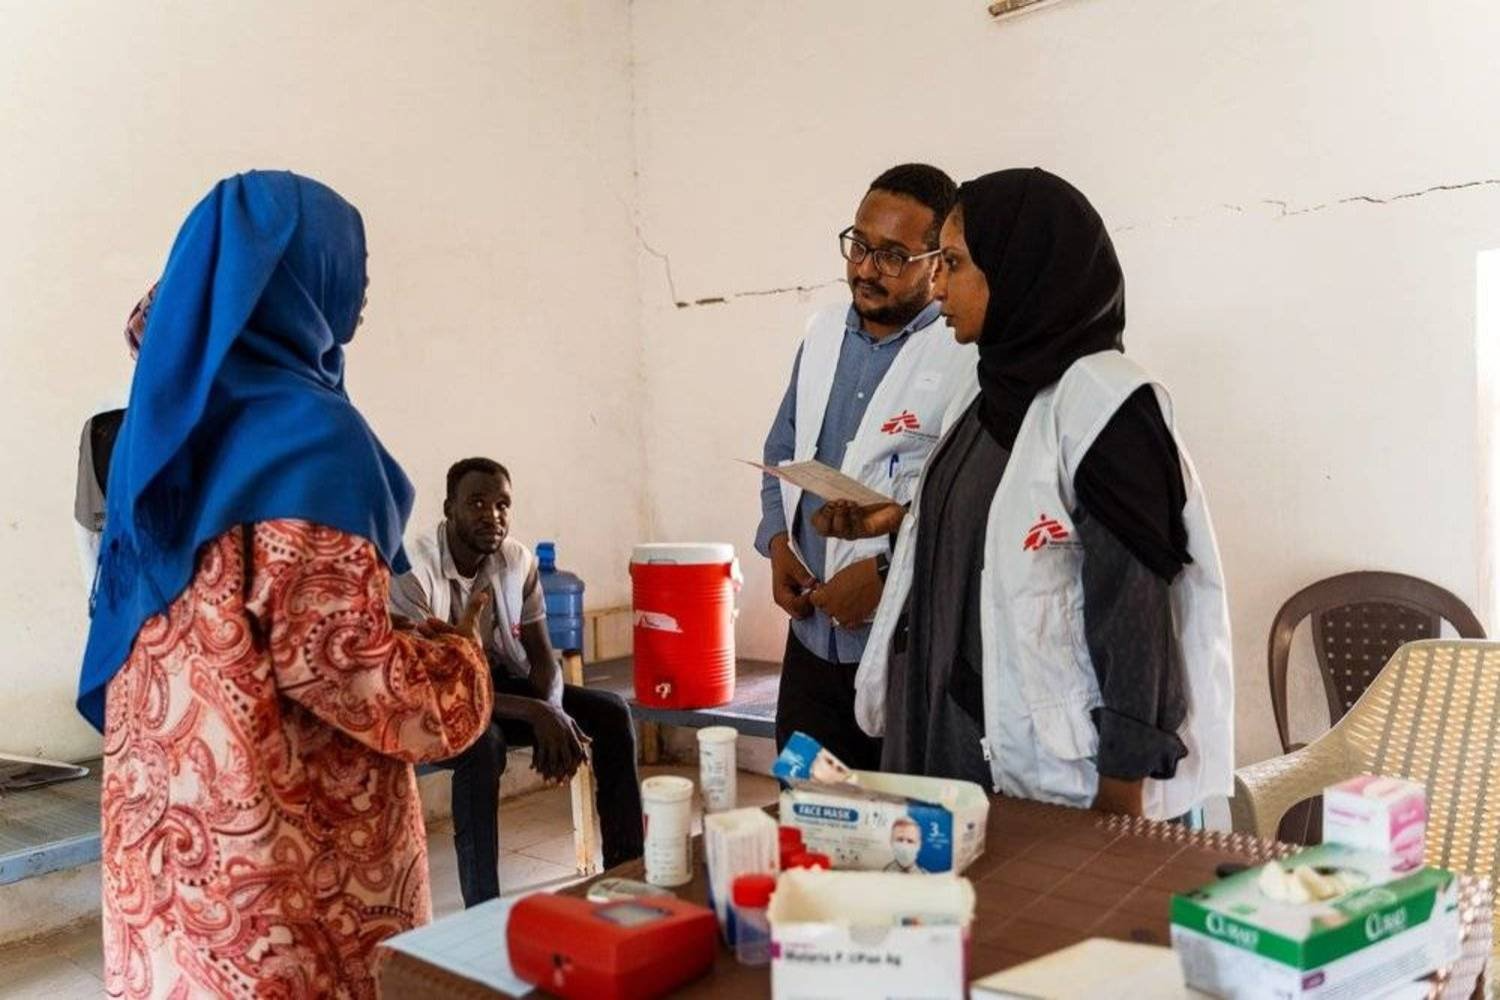 Health workers from Doctors Without Borders (MSF) welcome patients in Sudan